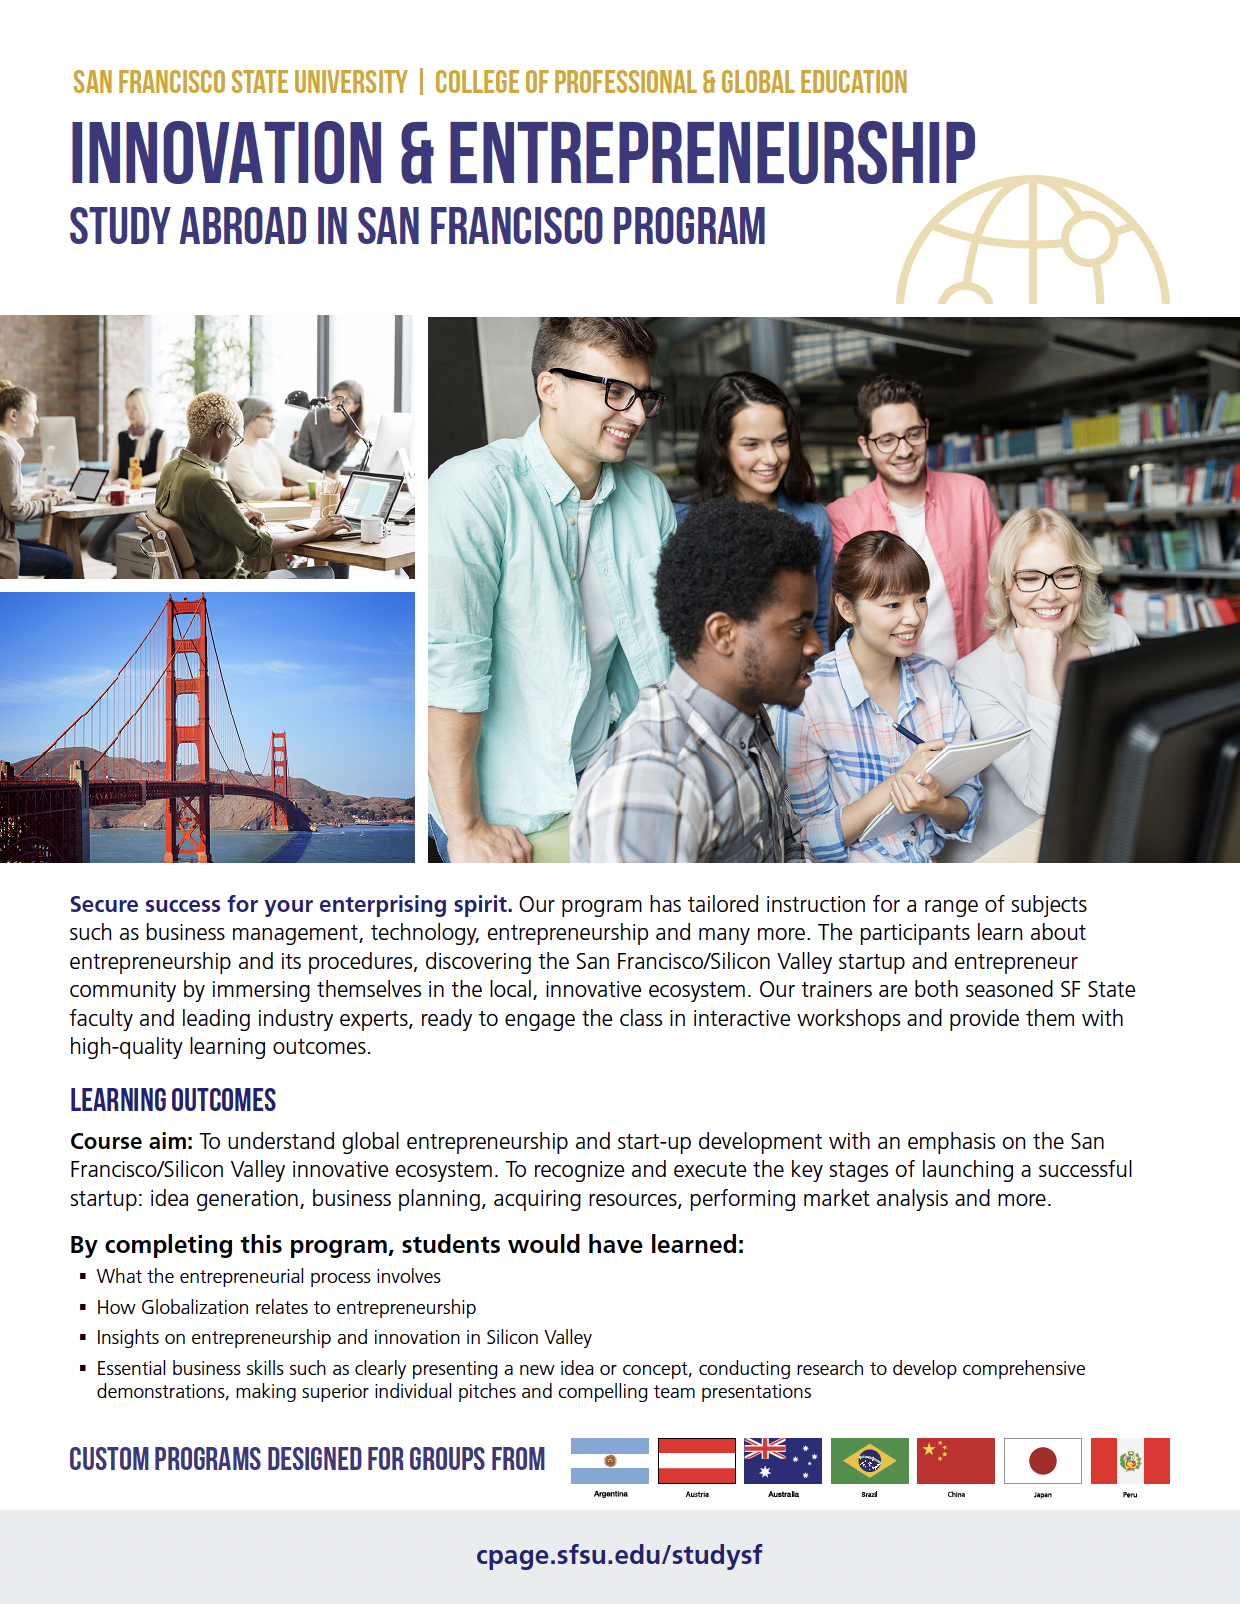 Study Abroad in San Francisco Brochure Cover